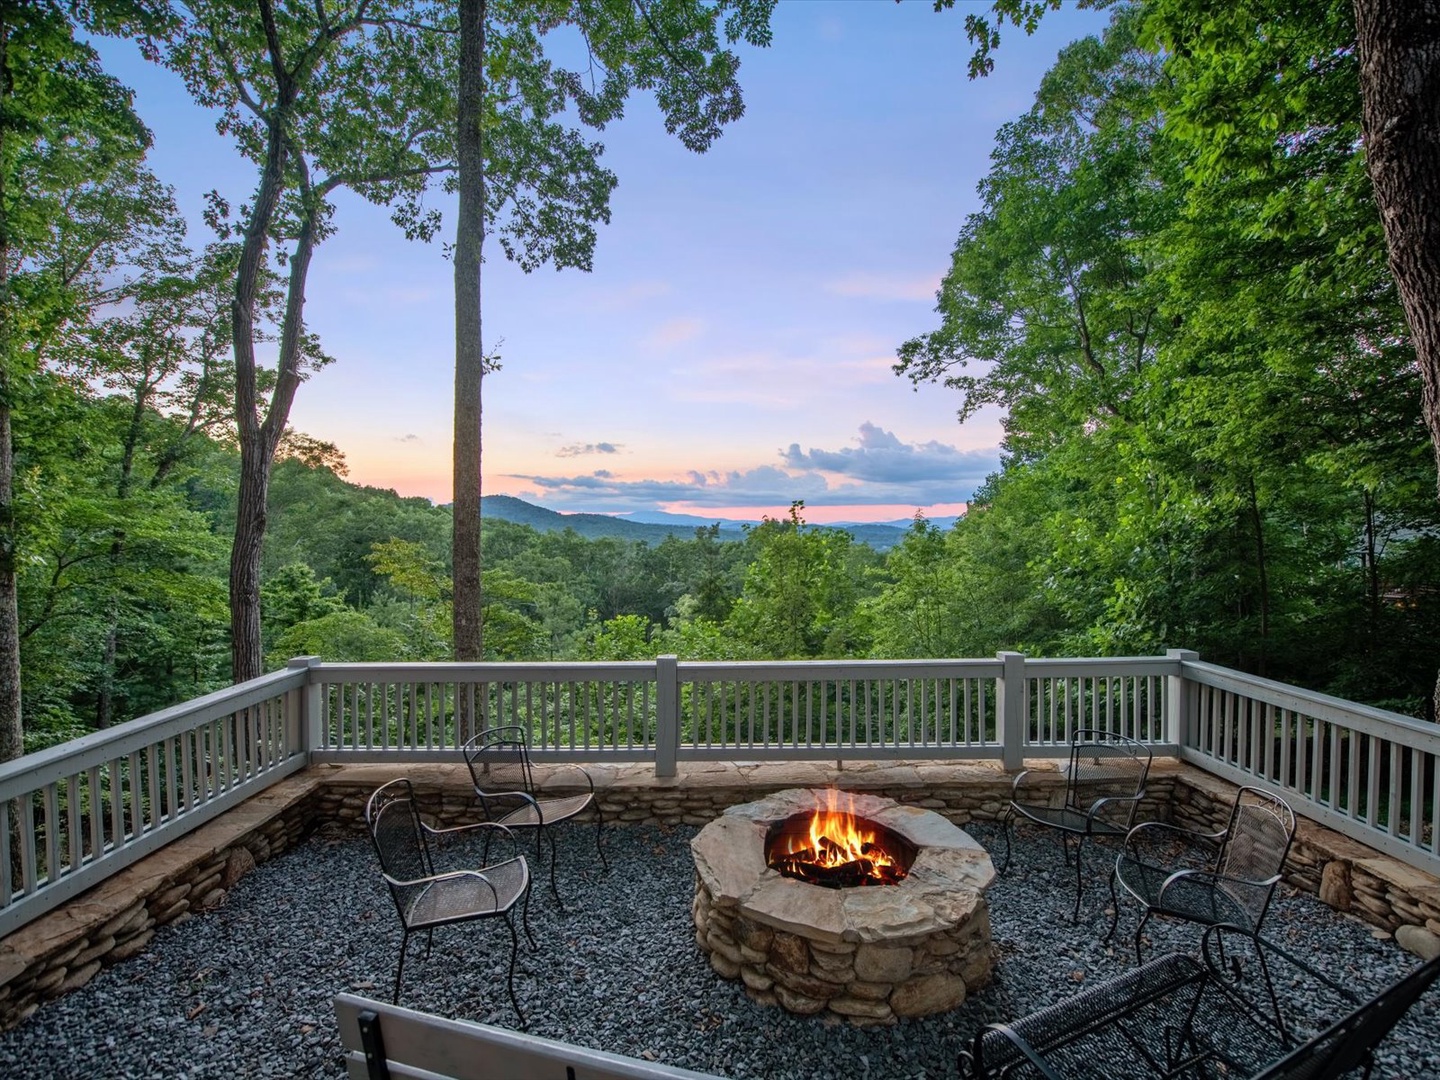 Aska Bliss- Outdoor fenced in stone firepit with a mountain view